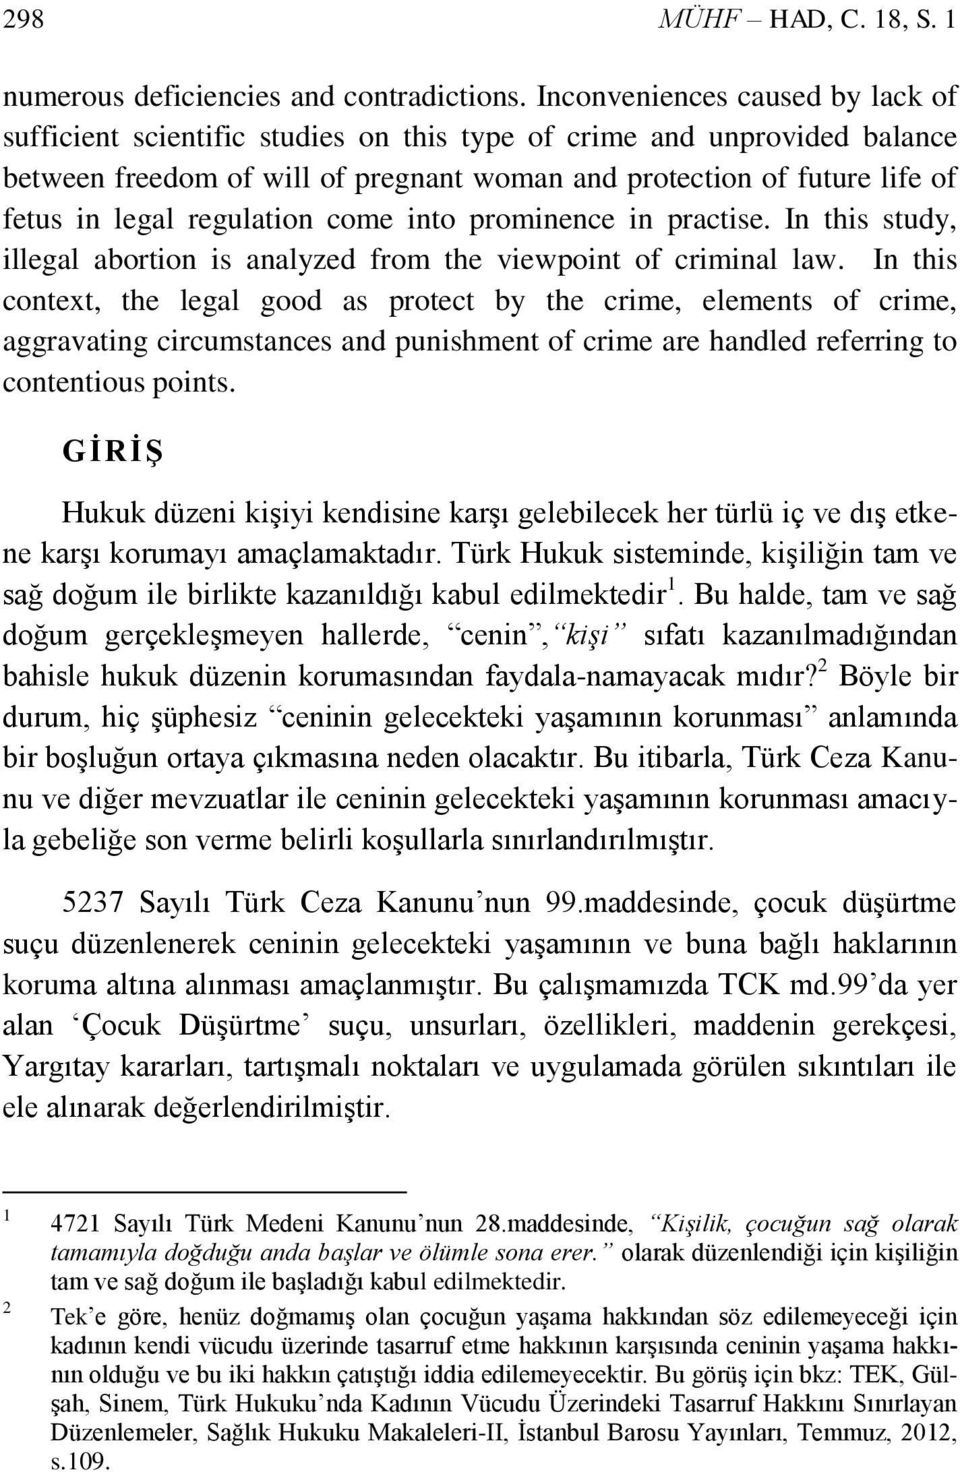 regulation come into prominence in practise. In this study, illegal abortion is analyzed from the viewpoint of criminal law.